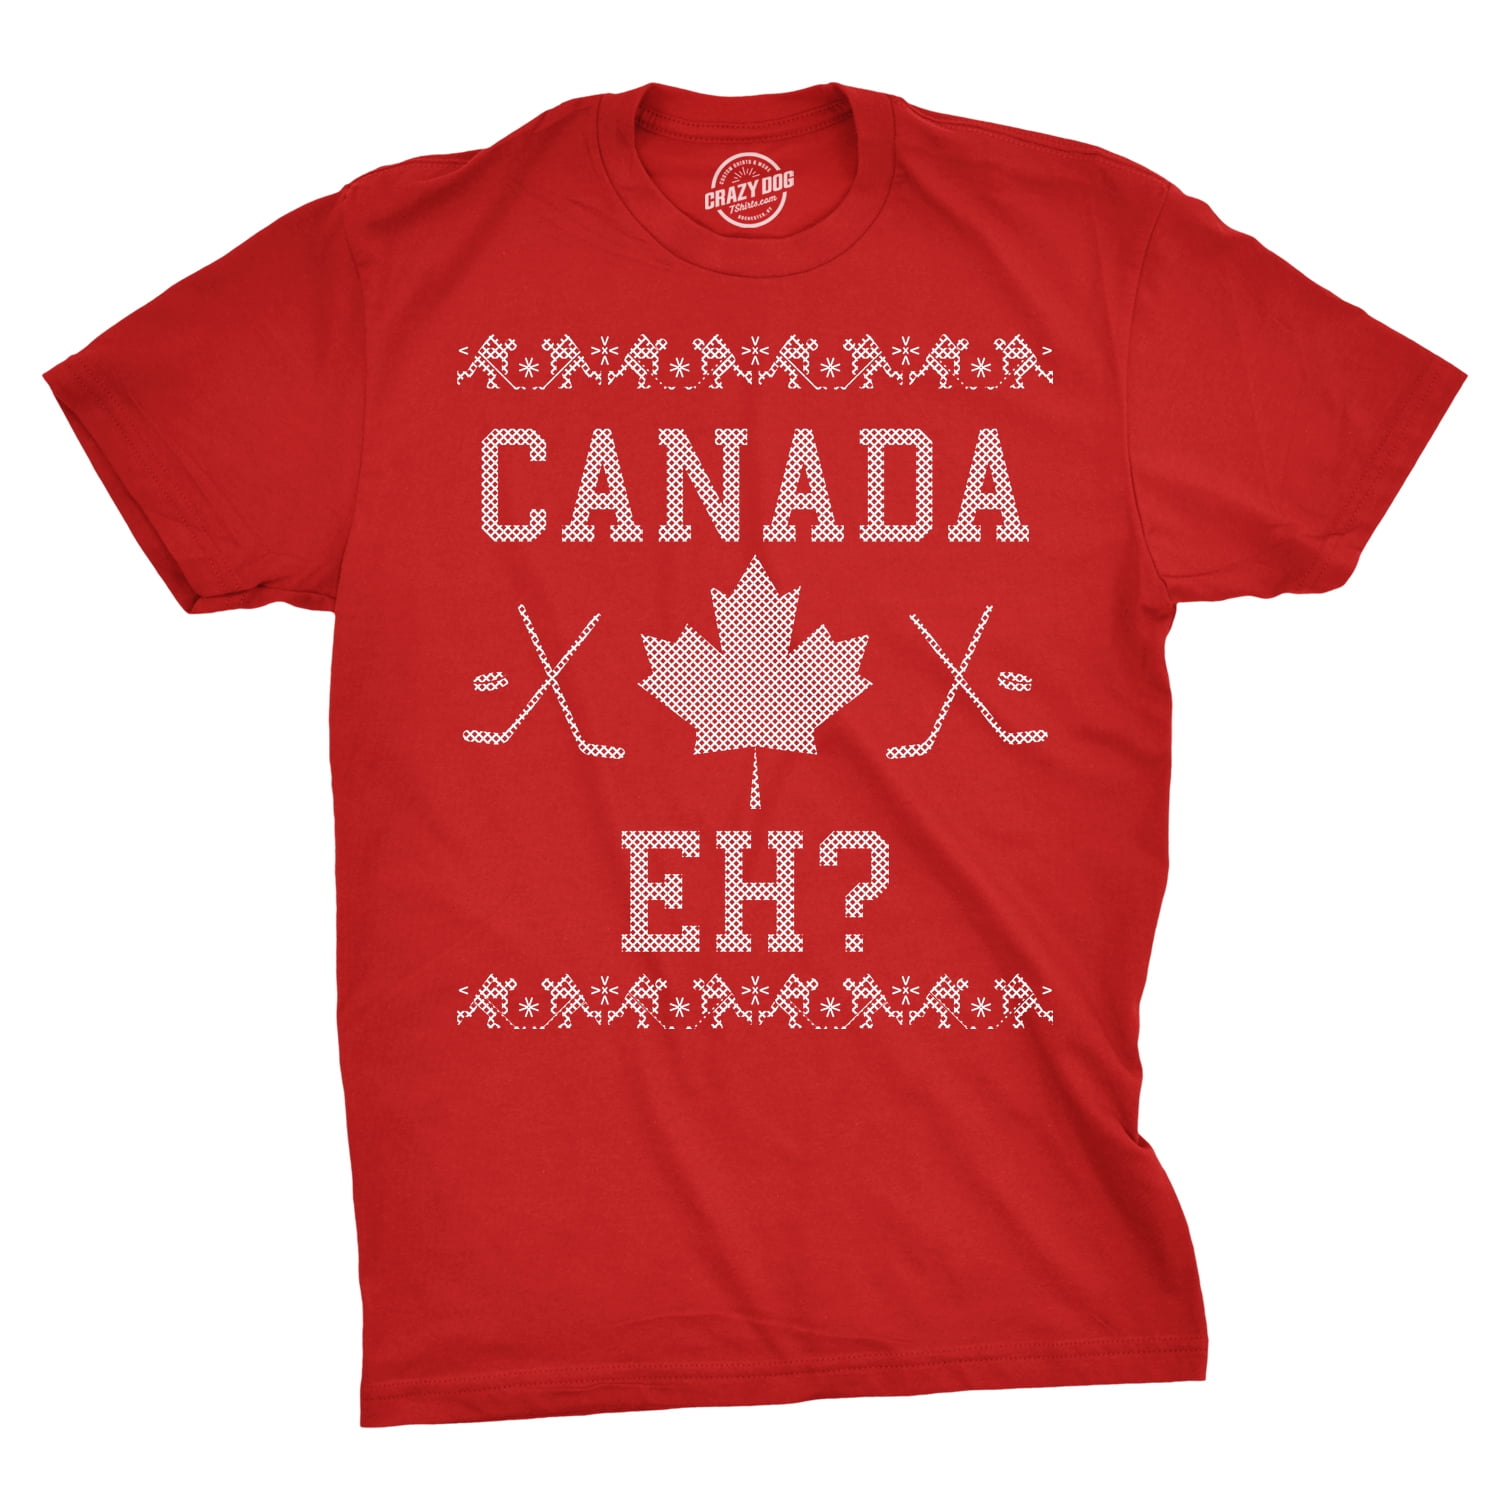 Mens Canada Eh Christmas Sweater Canadian Pride Holiday T shirt (Red) - 4XL Graphic Tees - Walmart.com